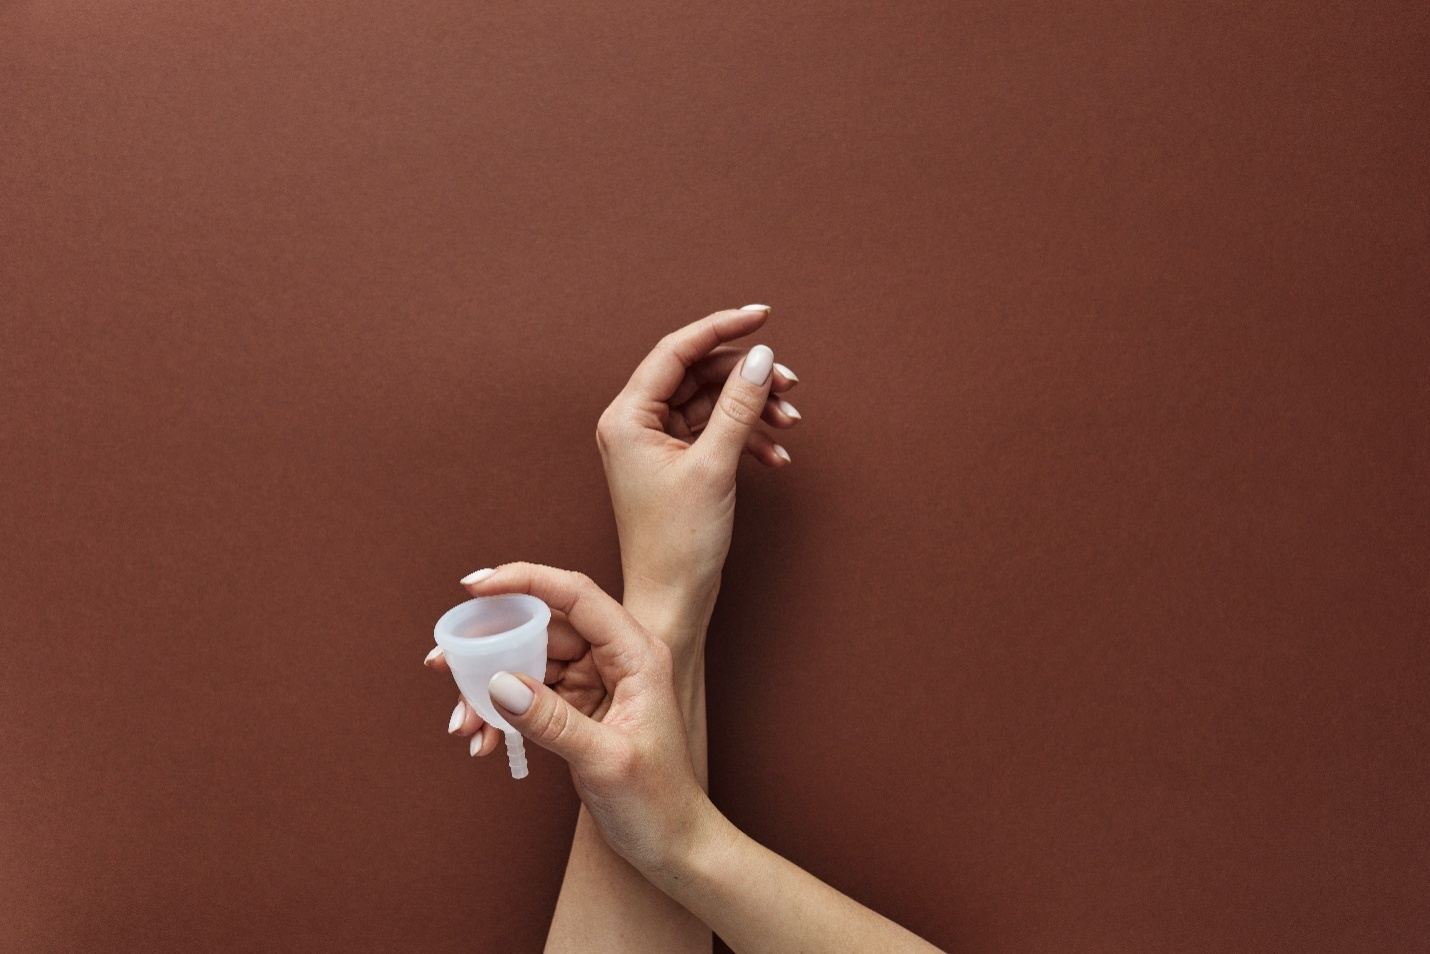 A pair of hands holding a menstrual cup